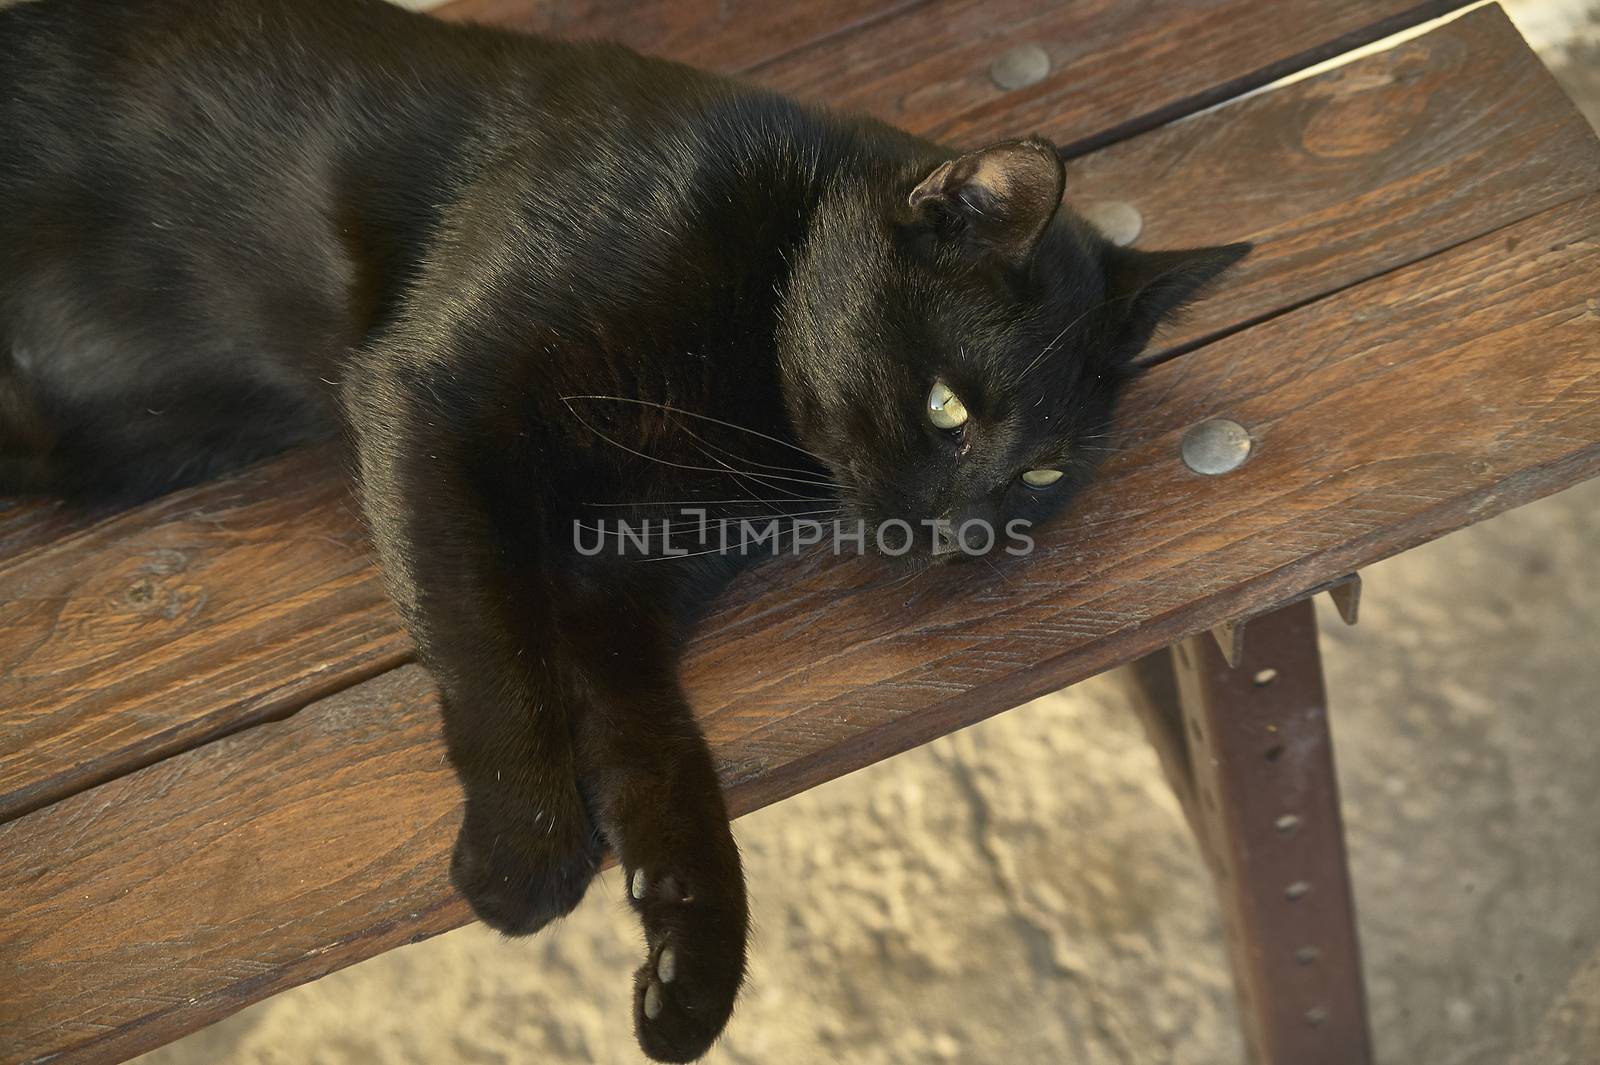 The cat at rest by pippocarlot